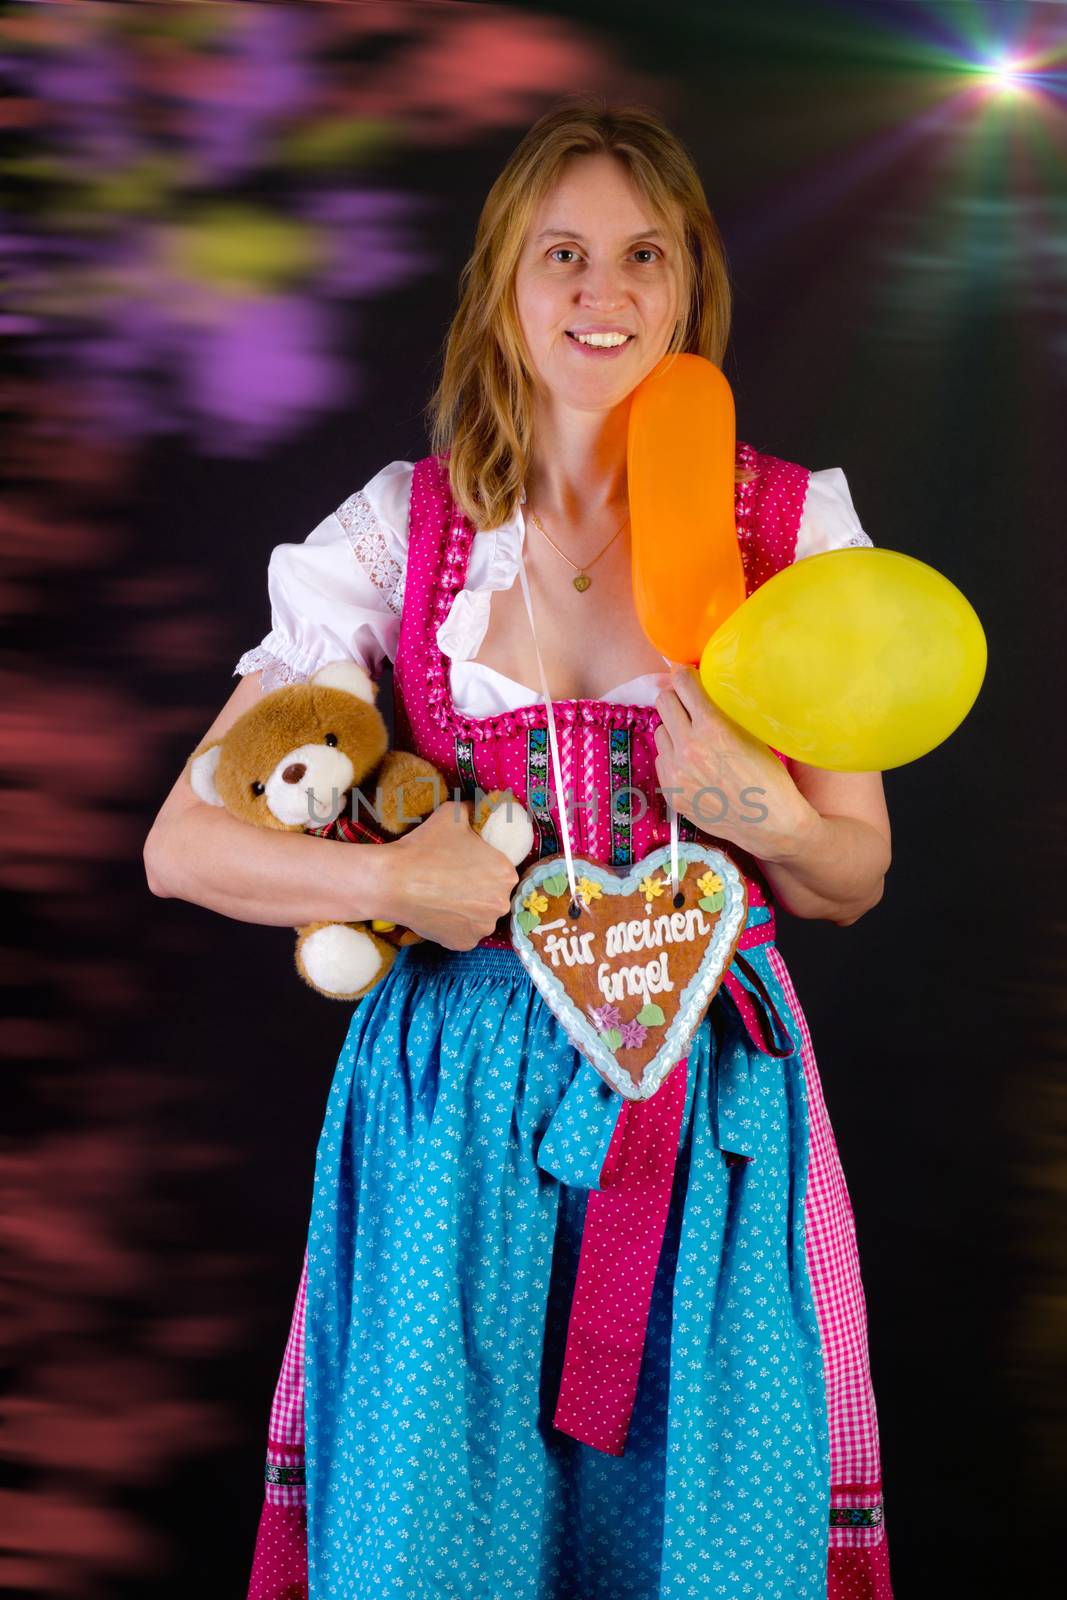 Woman in dirndl won some prizes at Oktoberfest by gwolters